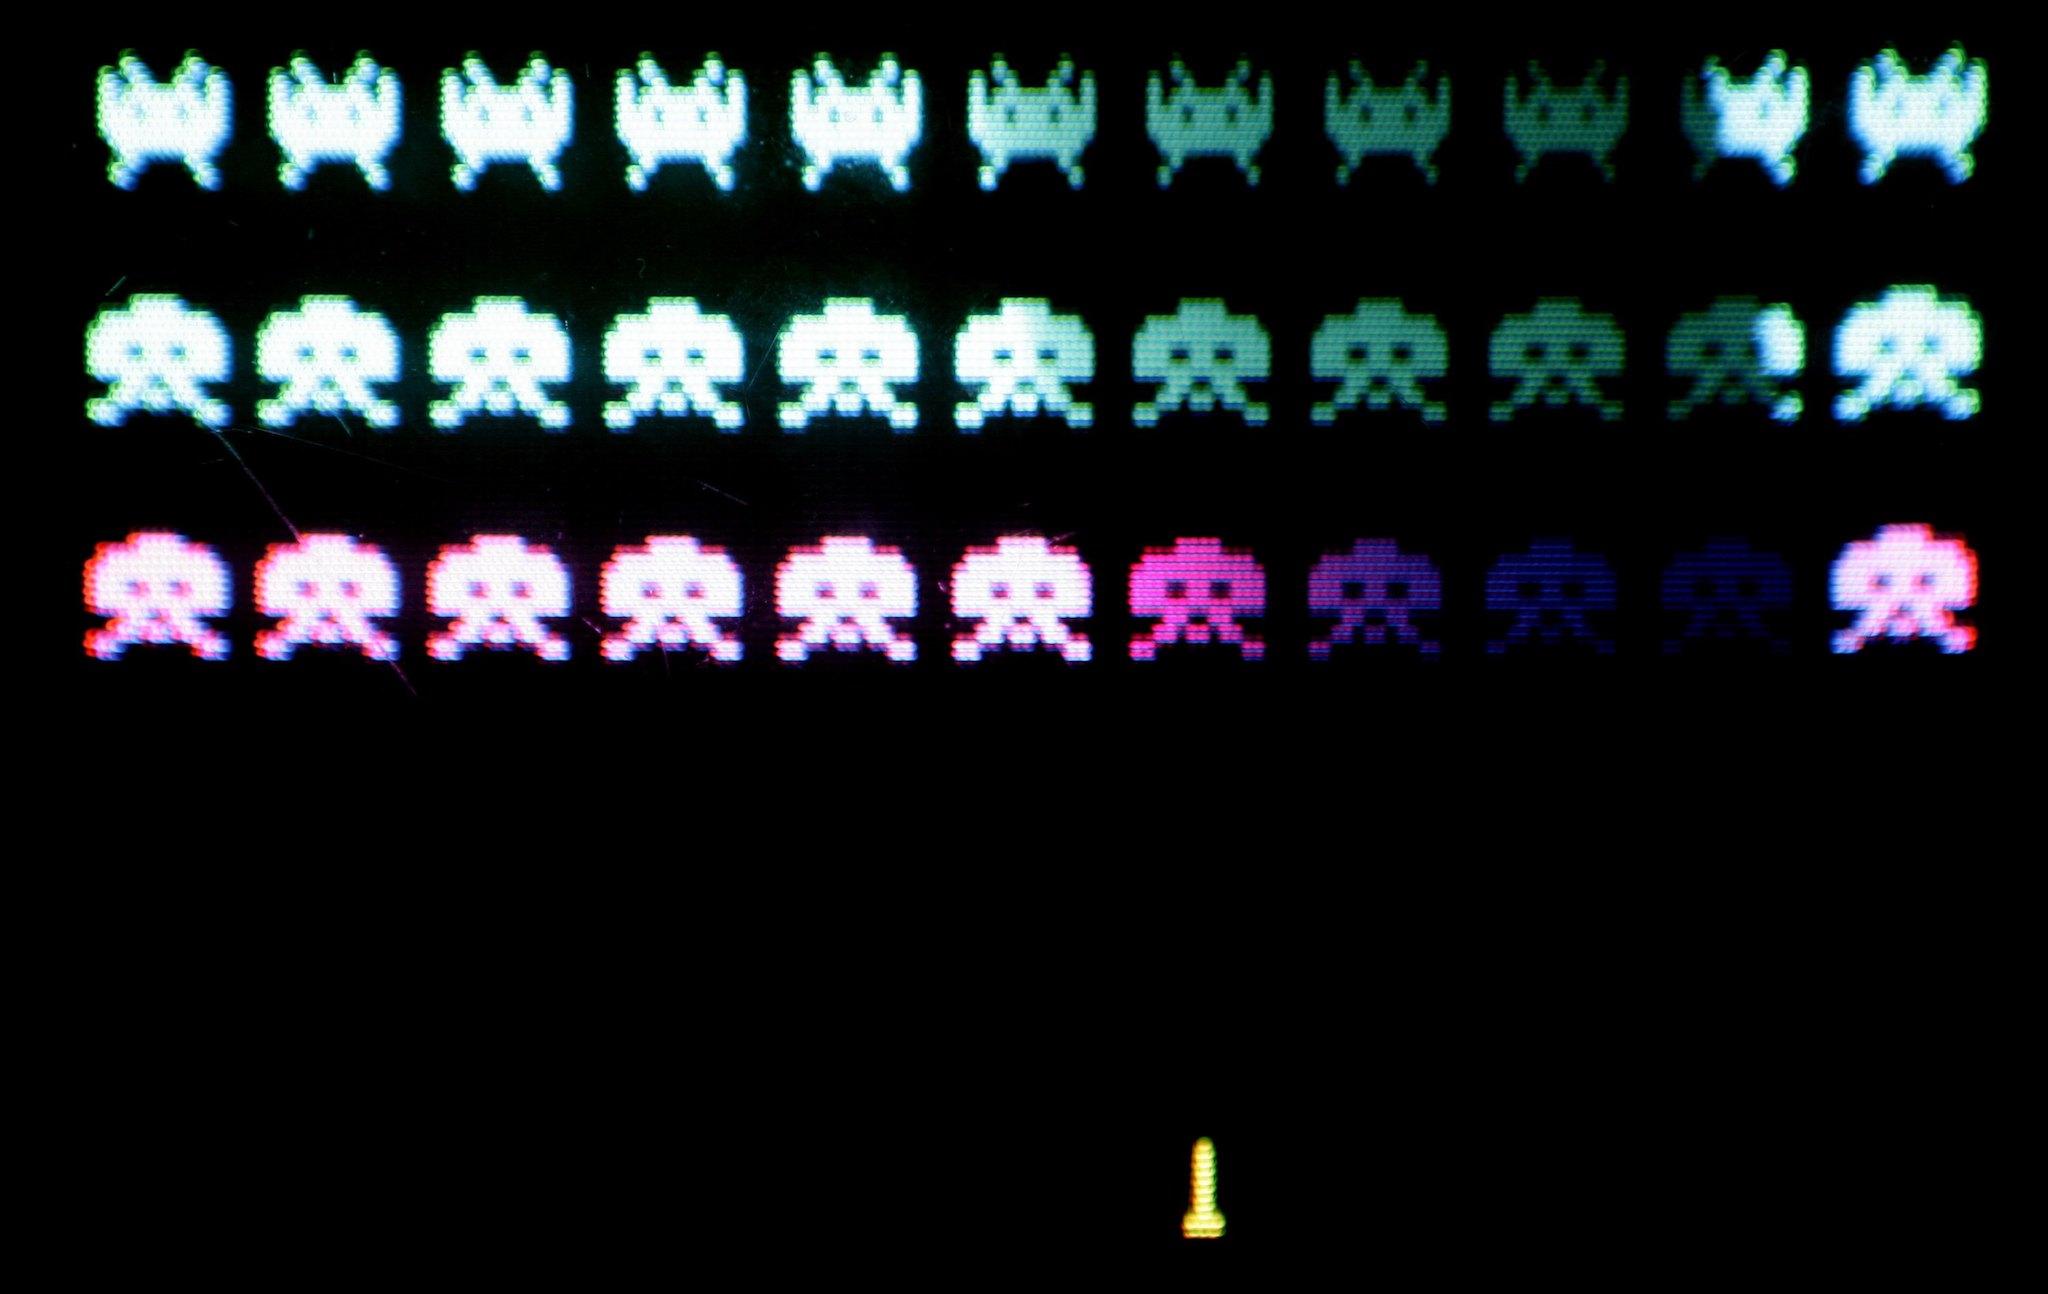 A classic video game 'Space Invaders' is displayed at the Science Museum on October 20, 2006 in London